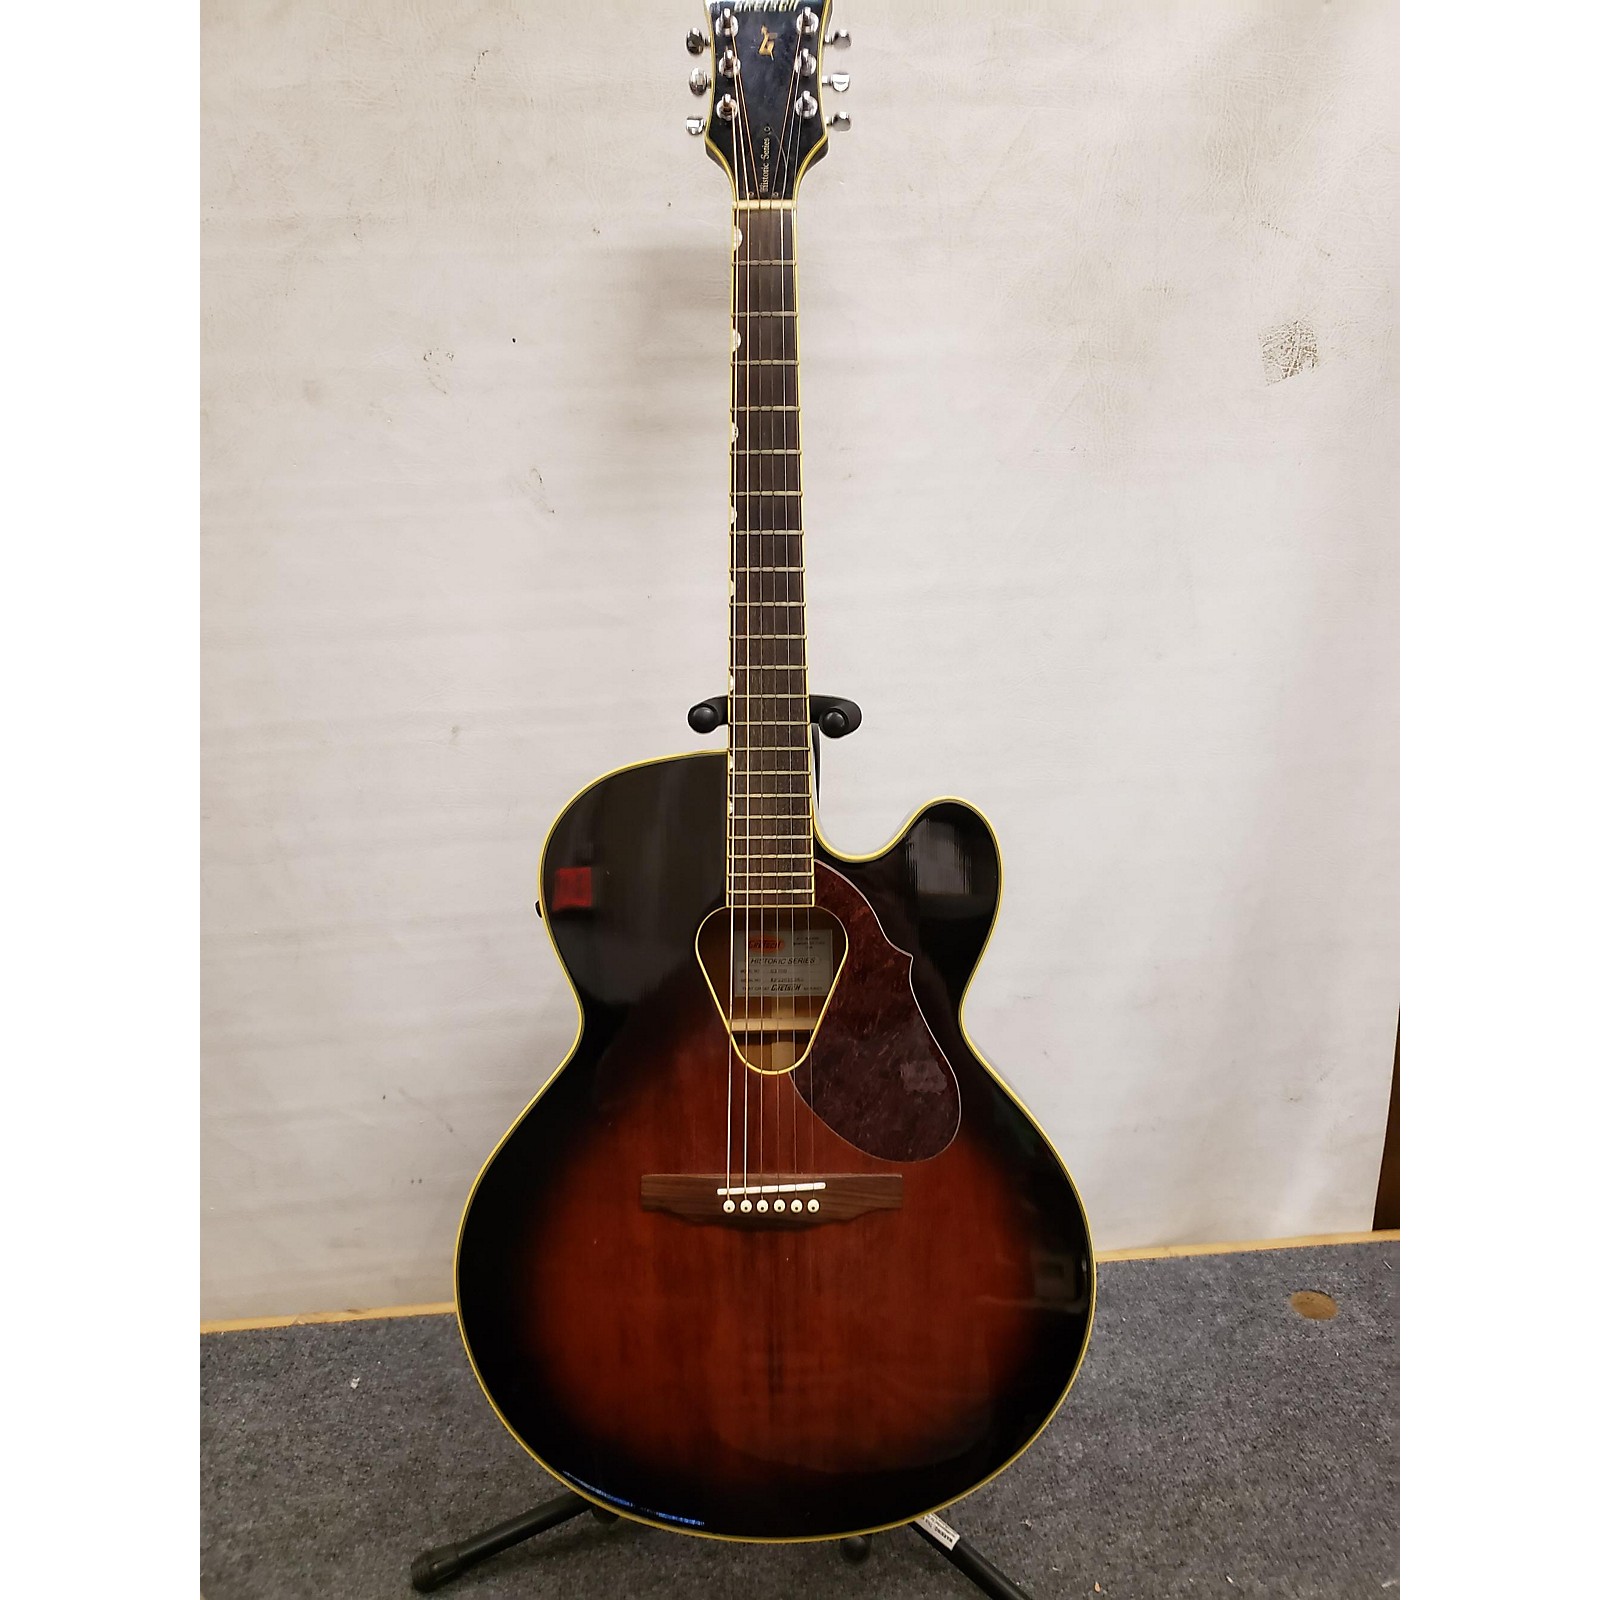 used acoustic guitars